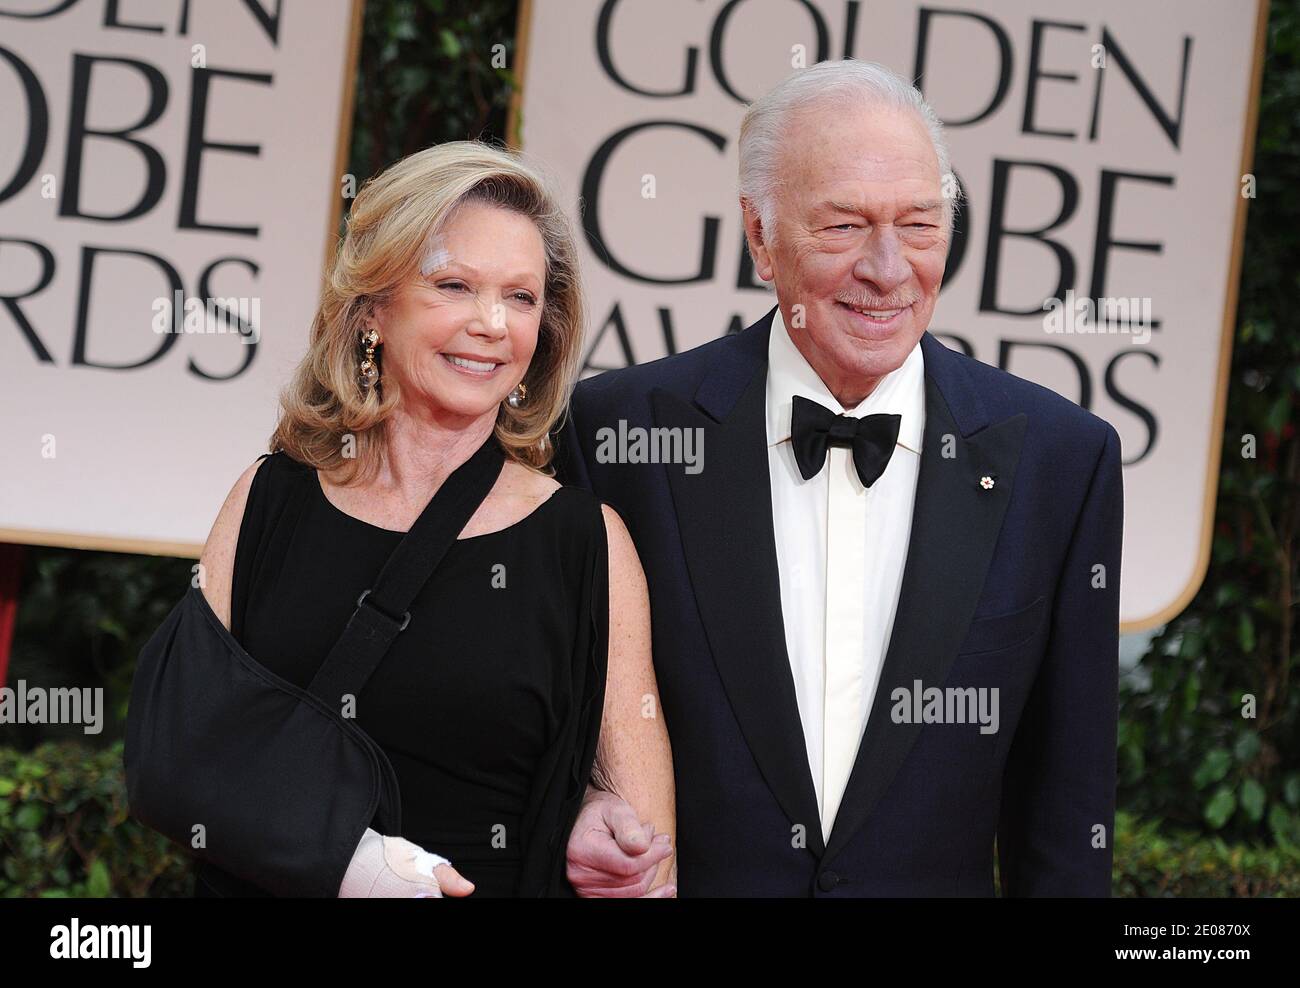 Christopher Plummer and Elaine Taylor arriving for the 69th Annual Golden Globe Awards Ceremony, held at the Beverly Hilton Hotel in Los Angeles, CA, USA on January 15, 2012. Photo by Lionel Hahn/ABACAPRESS.COM Stock Photo